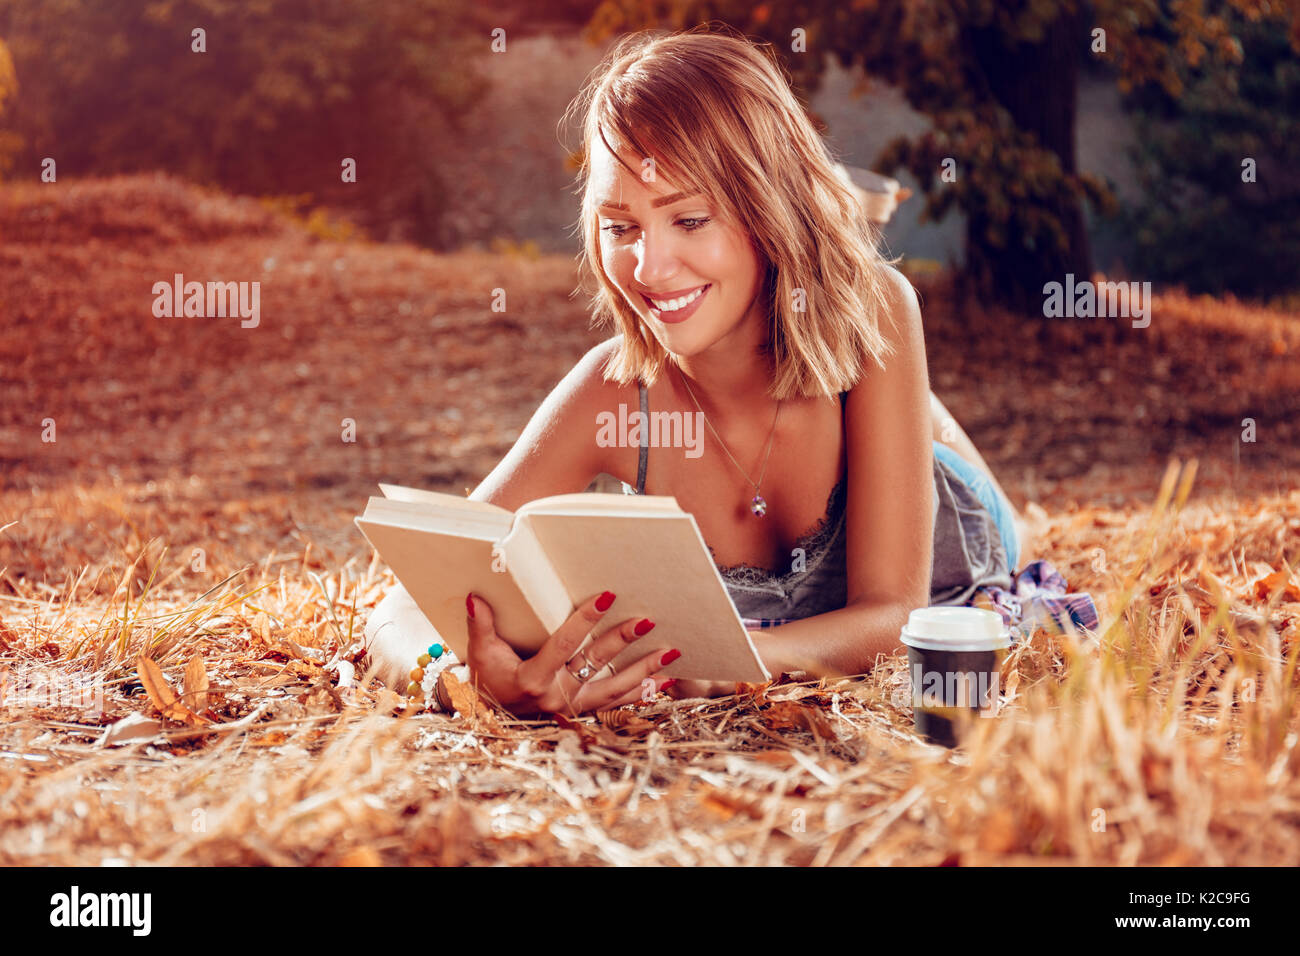 Cute smiling young woman lying on the withered grasses in autumn and reading book. Stock Photo